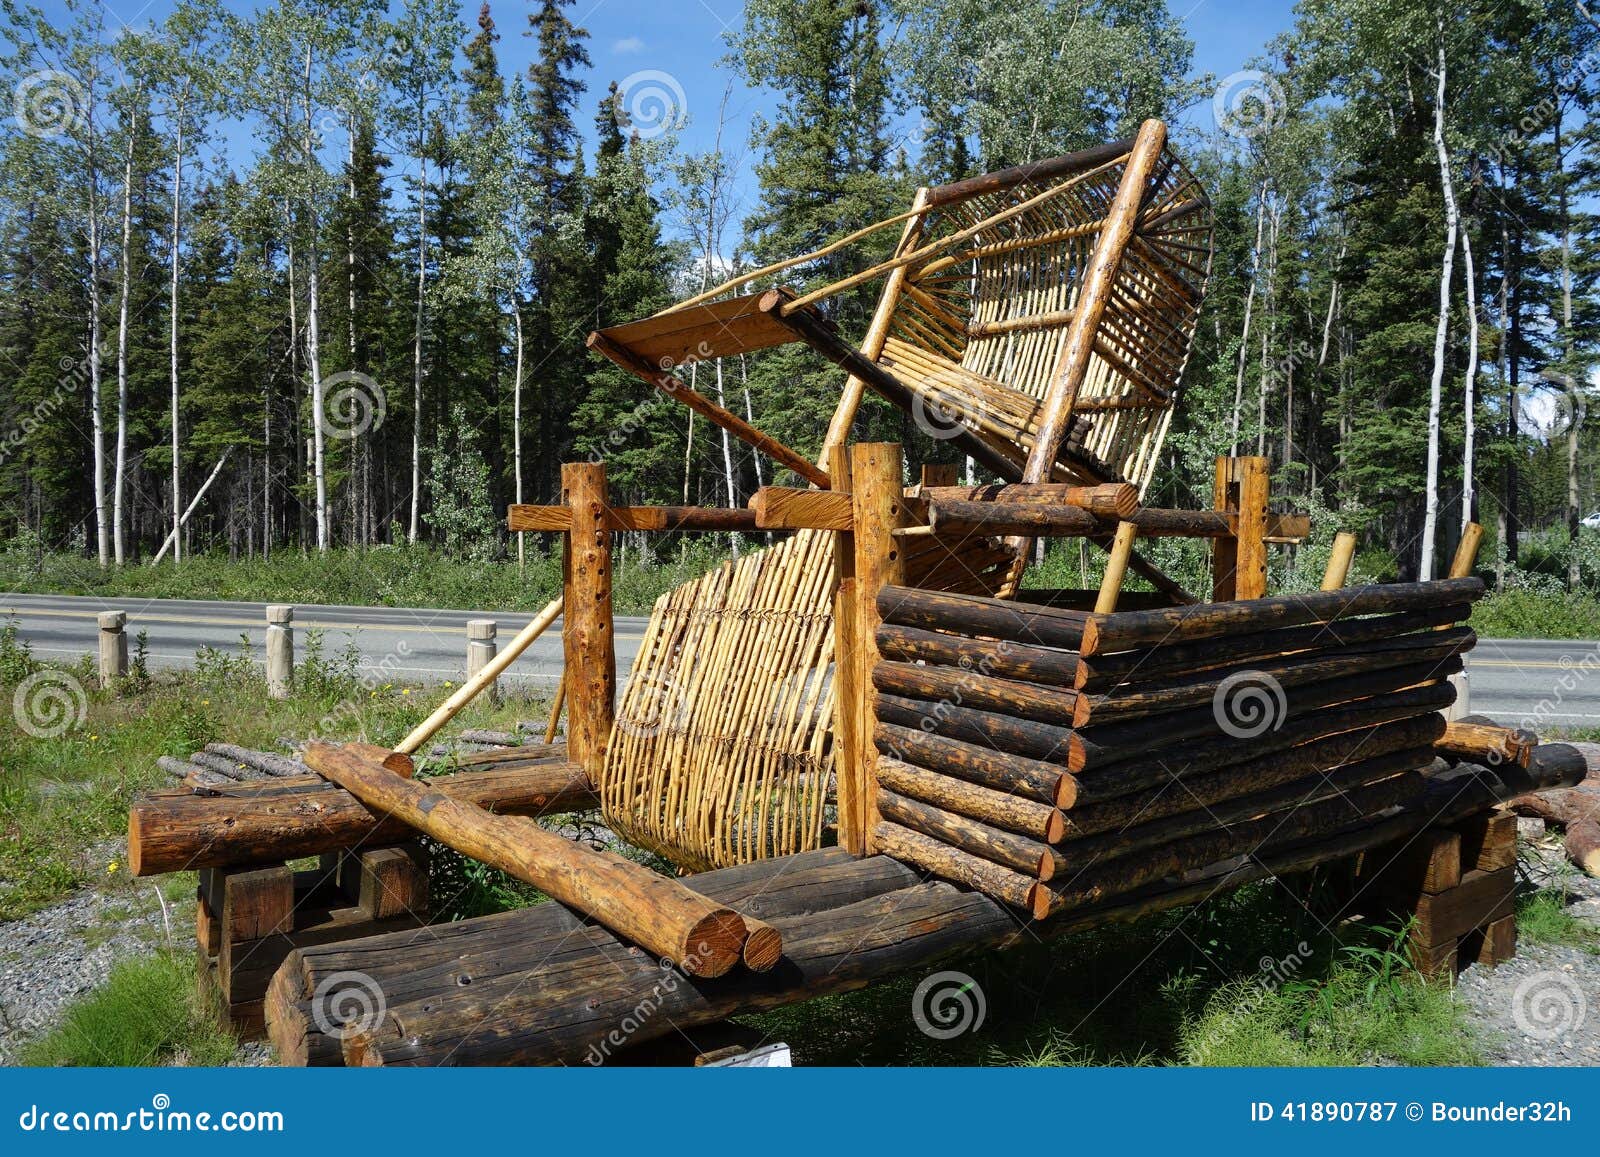 https://thumbs.dreamstime.com/z/old-fish-wheel-alaska-used-natives-to-catch-salmon-copper-river-41890787.jpg